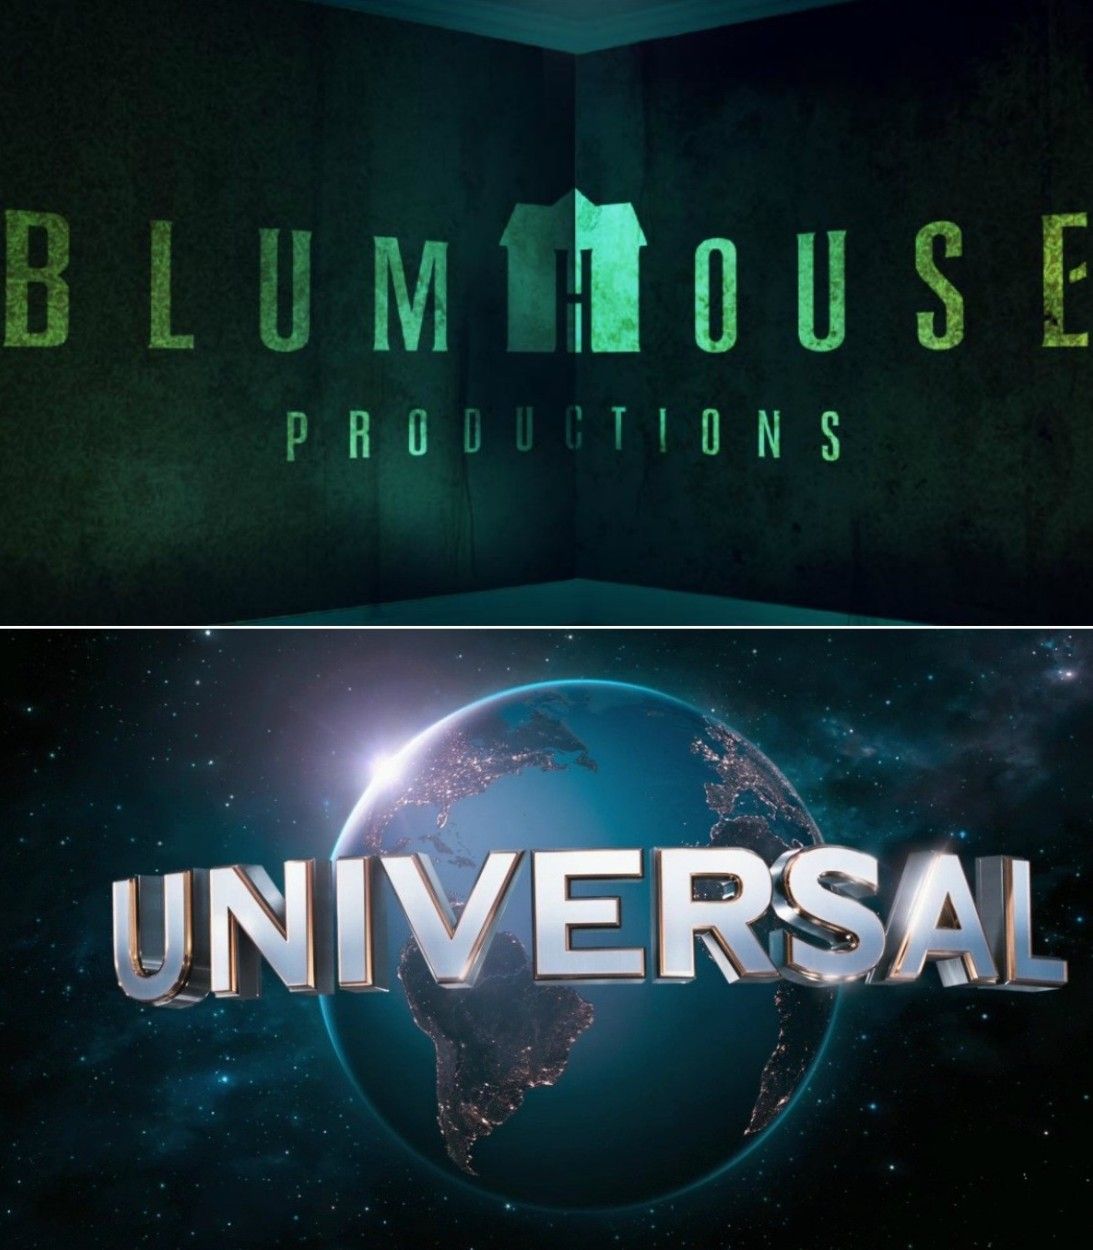 Universal and Blumhouse Vertical